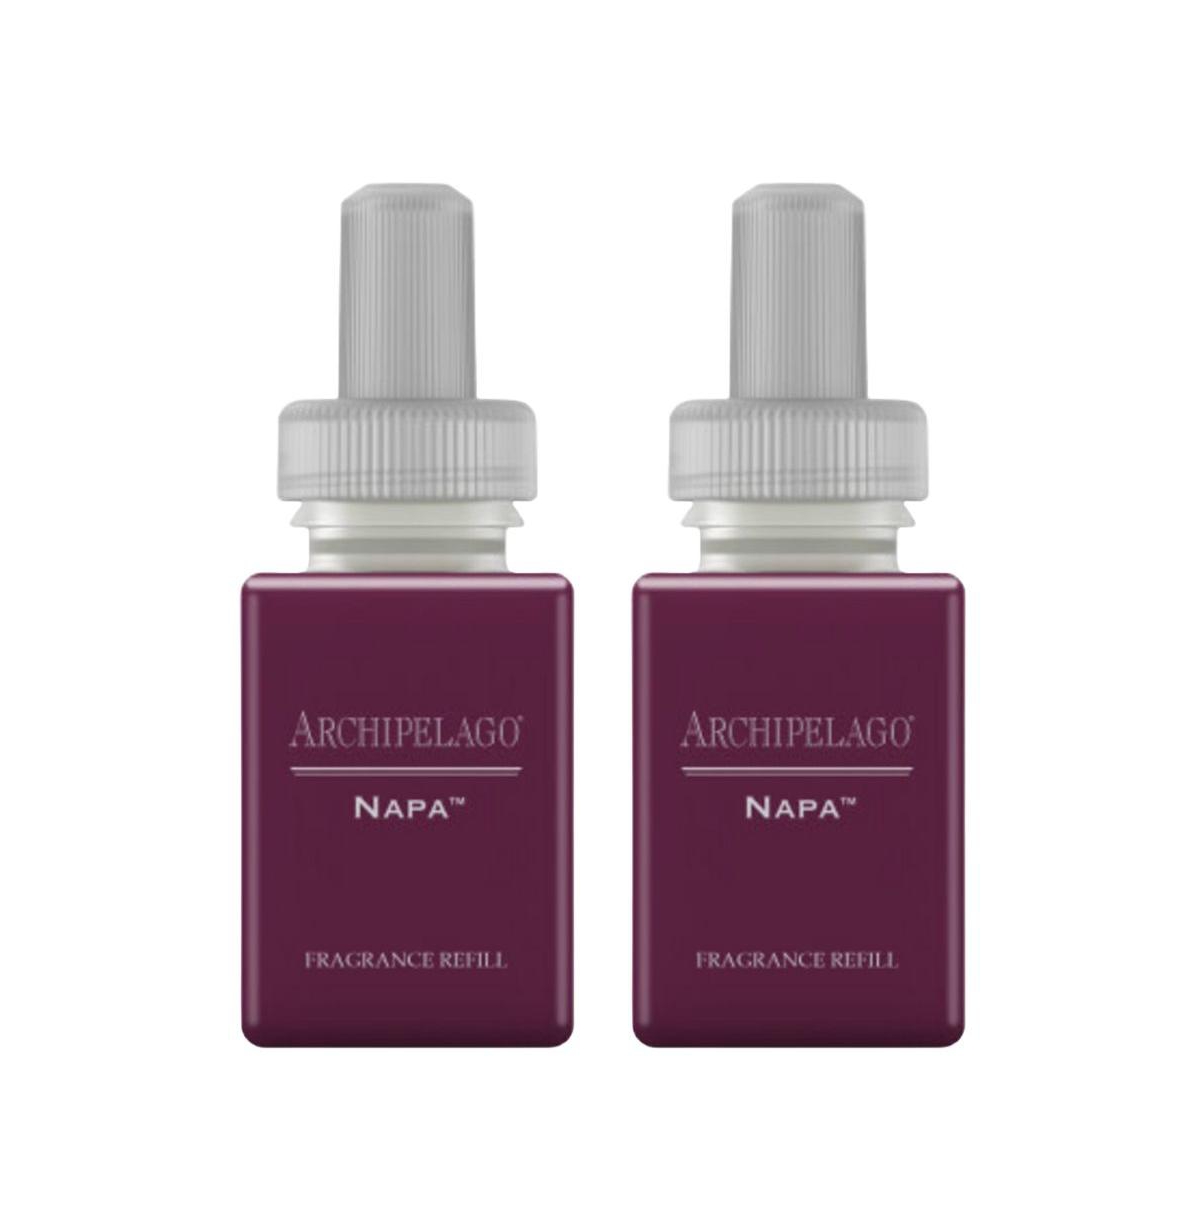 and Archipelago - Napa - Fragrance for Smart Home Air Diffusers - Room Freshener - Aromatherapy Scents for Bedrooms & Living Rooms - 2 Pack